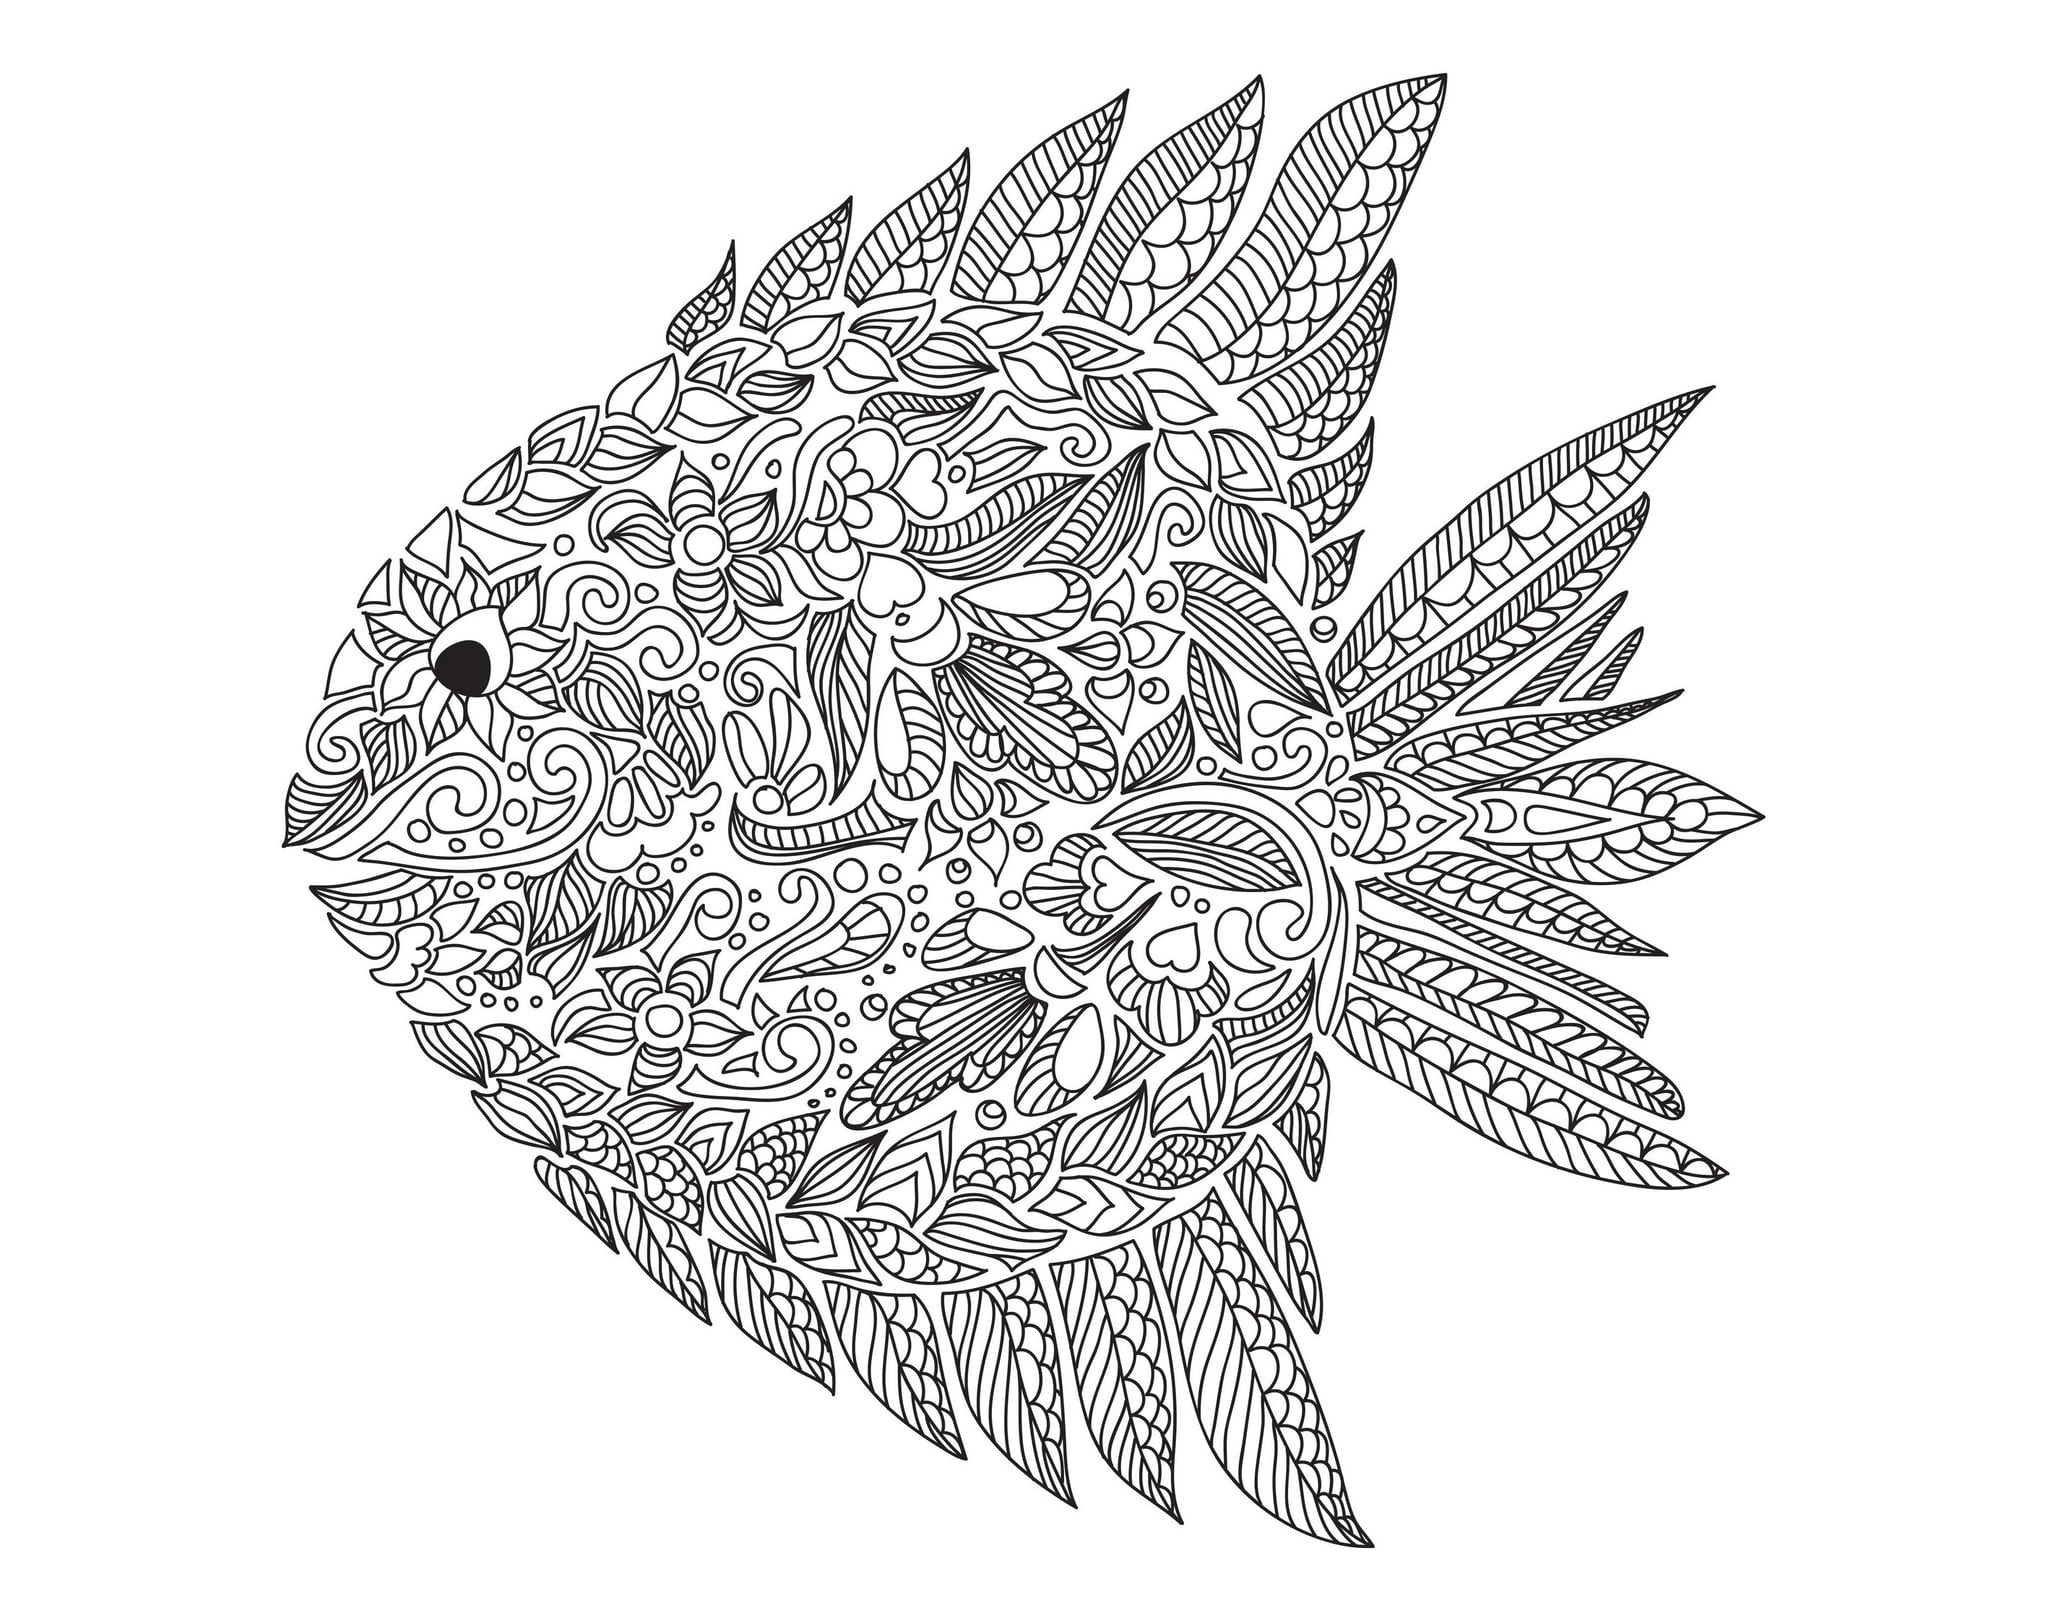 Fishing Coloring Book For Adults: A Fun Fishing Adult Coloring Book With  Funny Fishing Quotes on Mandala Patterns and With 50 Unique Designs For